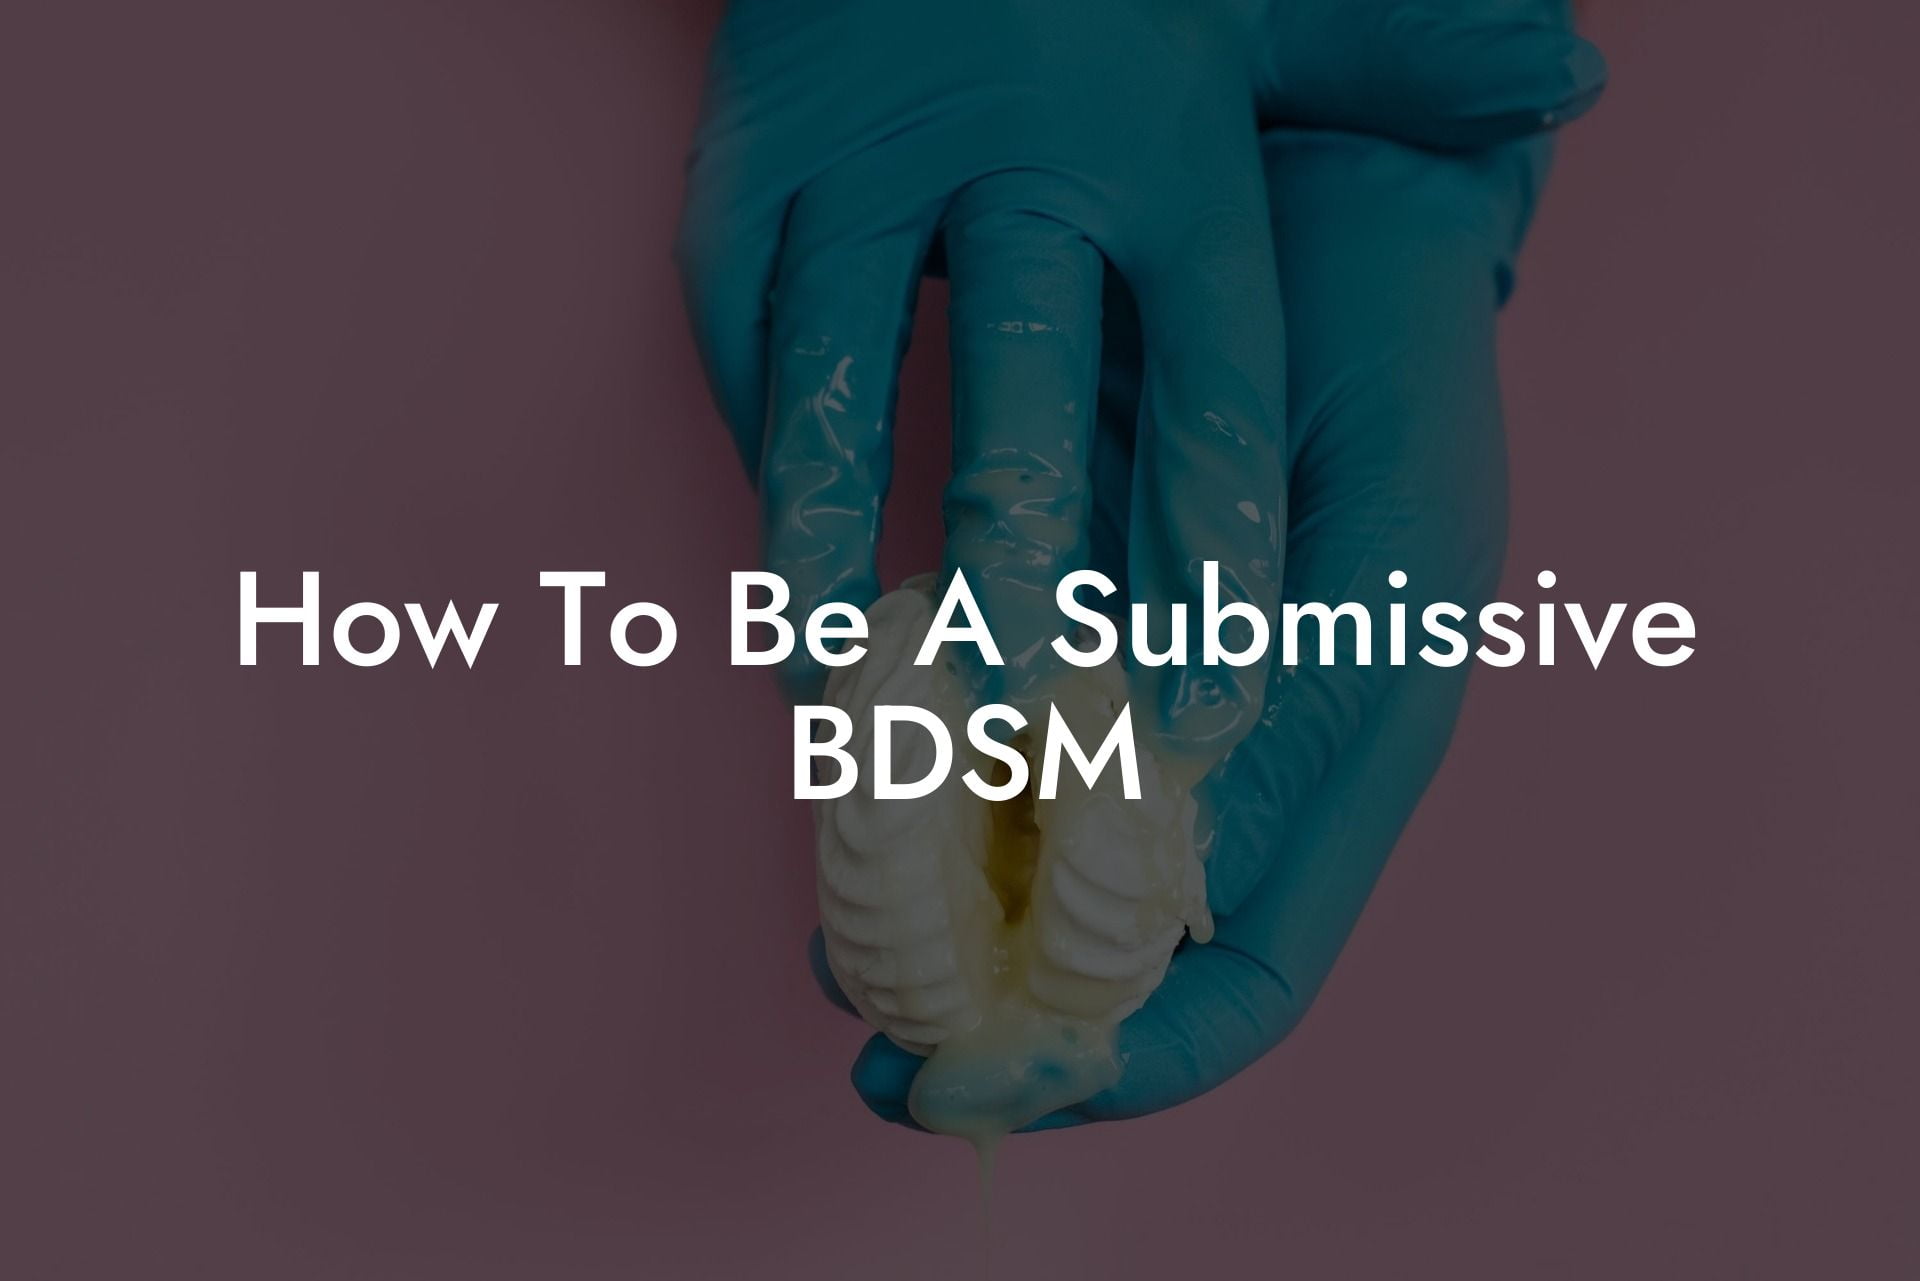 How To Be A Submissive BDSM